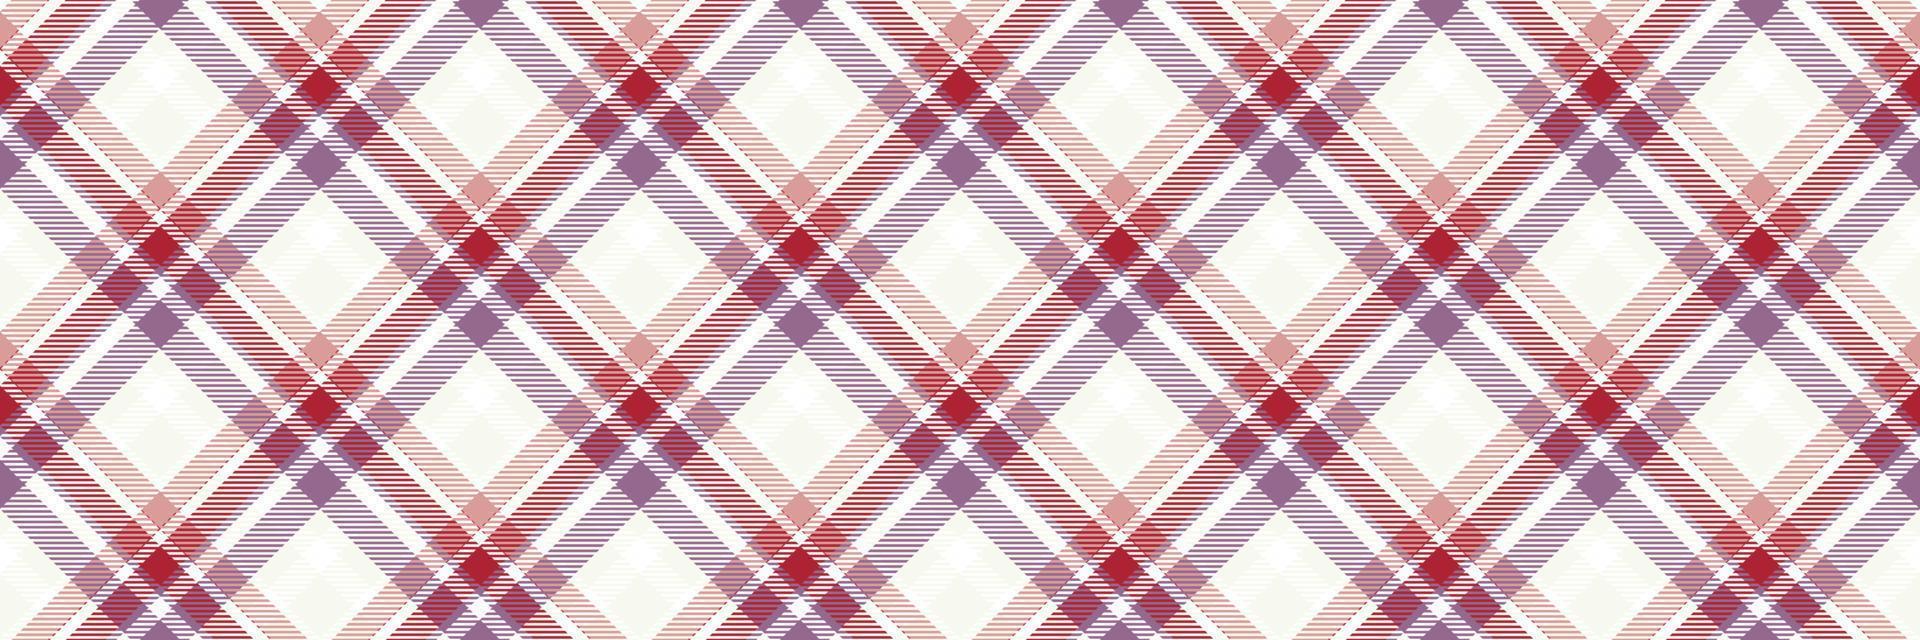 Vector plaid pattern is a patterned cloth consisting of criss crossed, horizontal and vertical bands in multiple colours.plaid Seamless for  scarf,pyjamas,blanket,duvet,kilt large shawl.